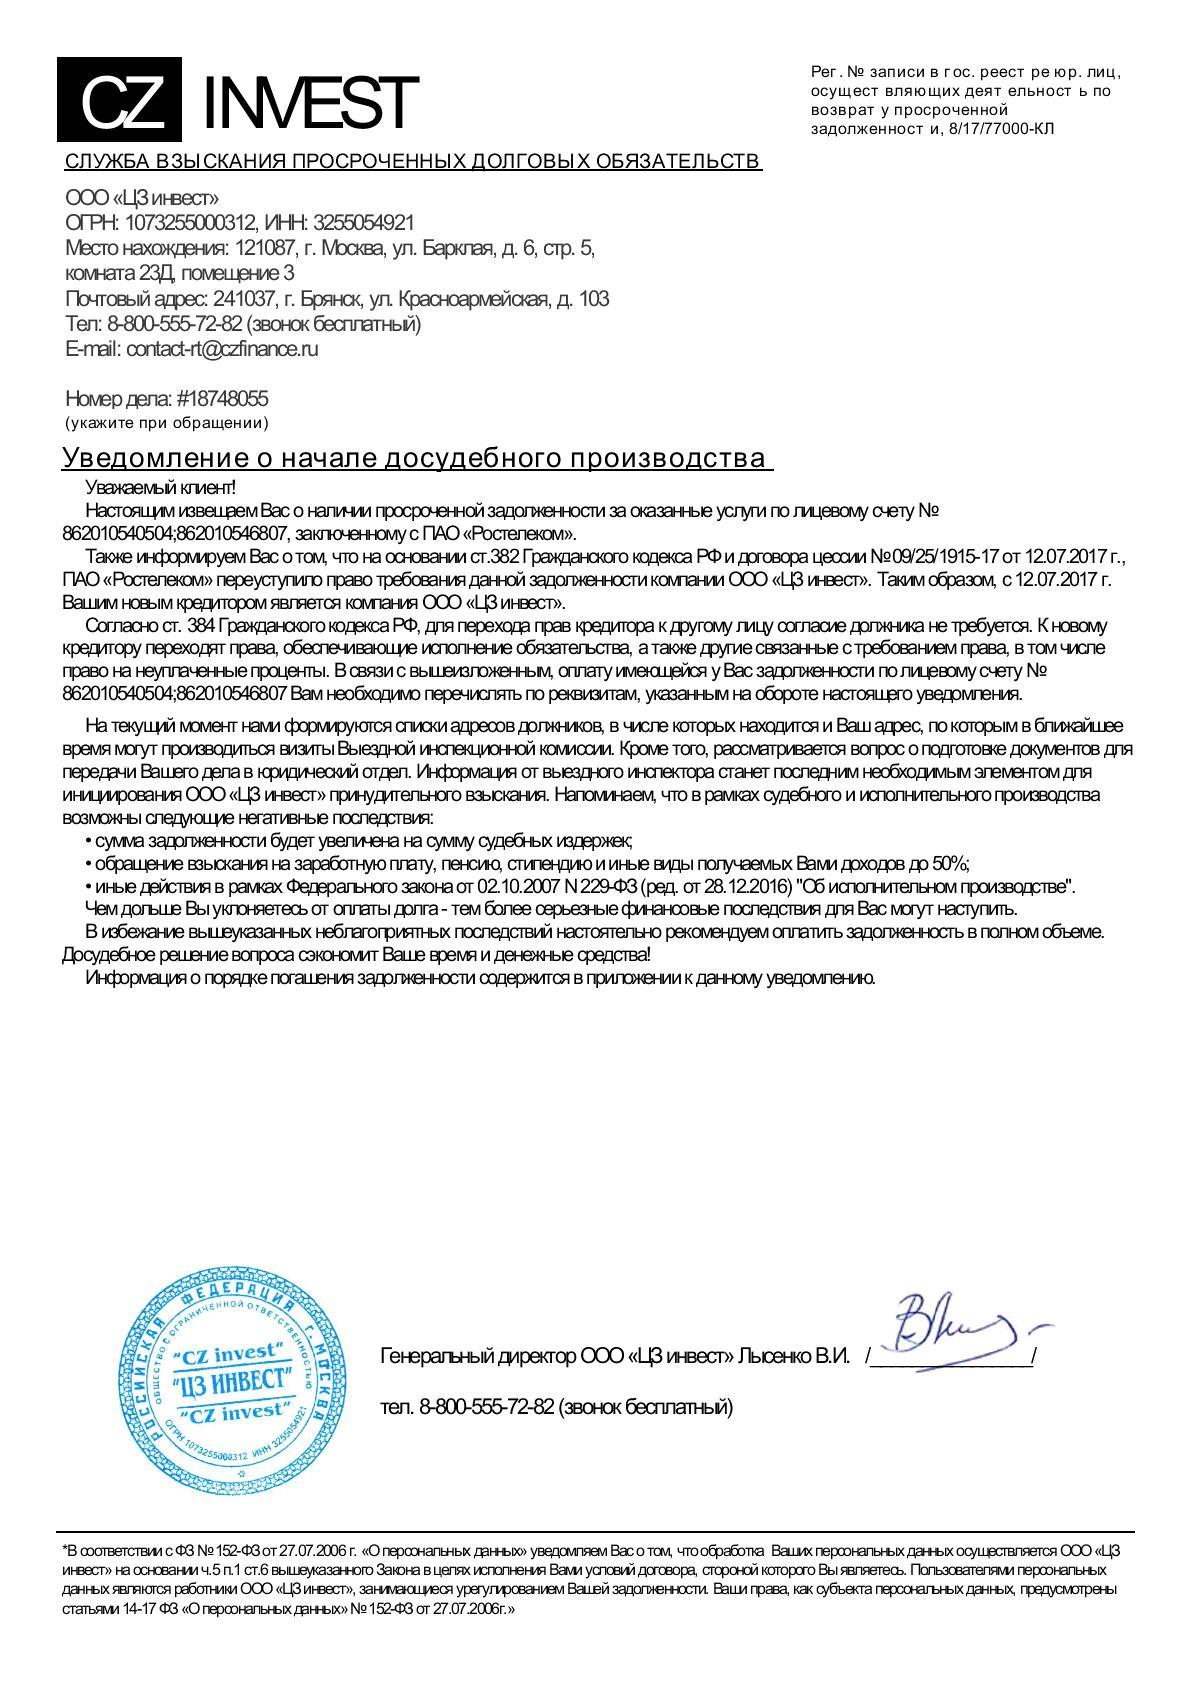 Rostelecom and scammers! - My, , Collectors, Rostelecom, Fraud, Longpost